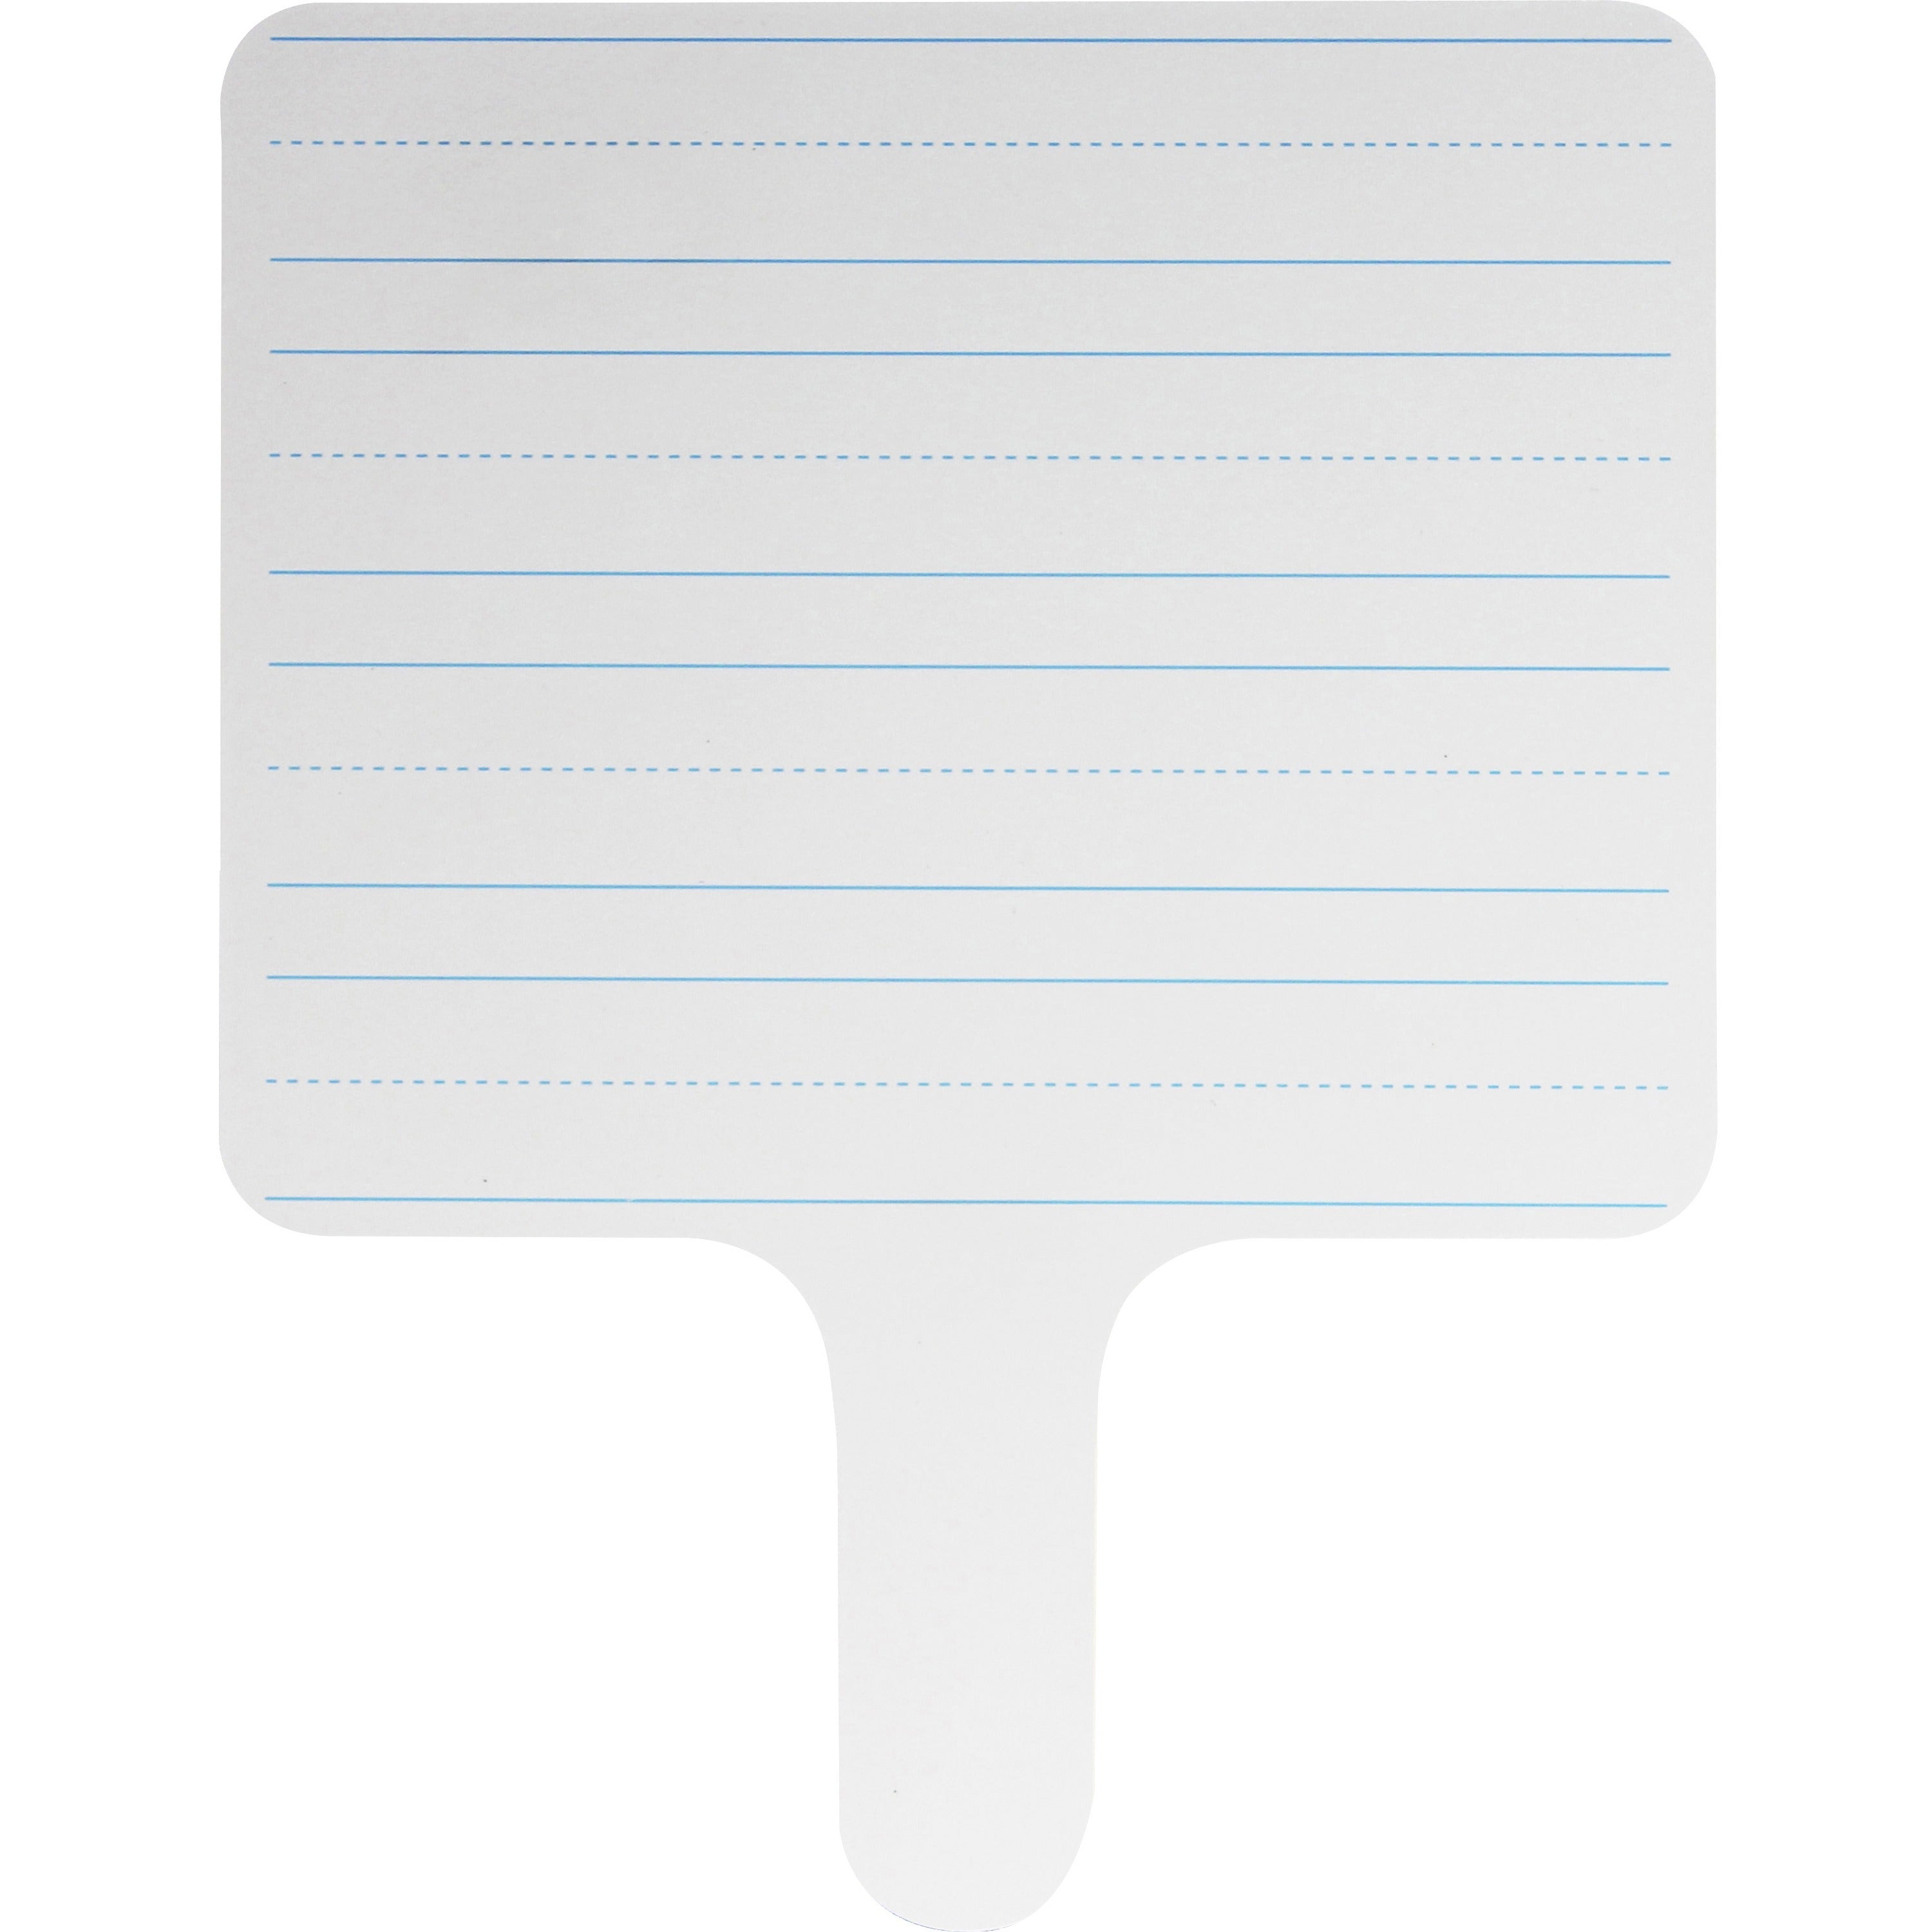 flipside-dry-erase-paddle-class-pack-78-06-ft-width-x-10-08-ft-height-white-surface-paddle-24-pack_flp18024 - 1